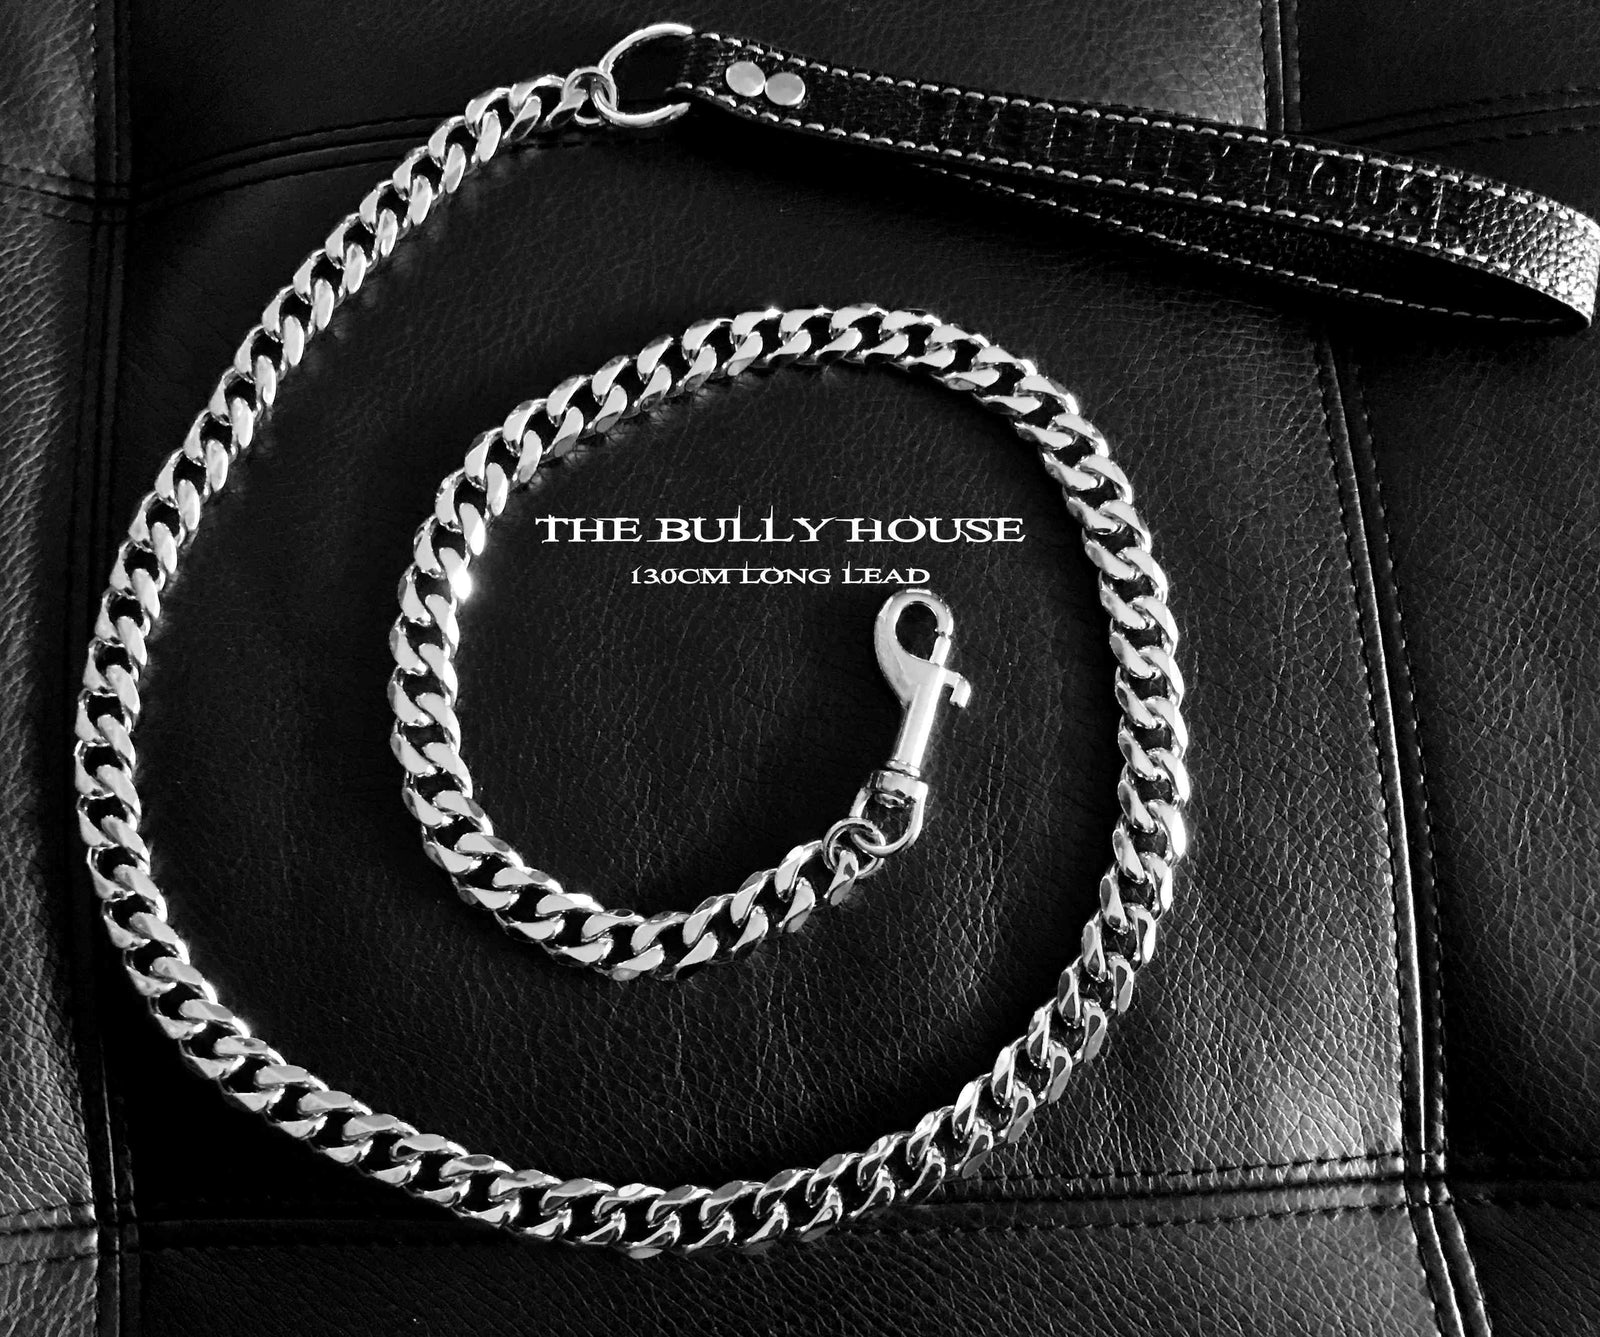 (Pre Order Now - Arriving approx end of DEC) The Bully House "LEASH Collection" SILVER 18mm Wide - 130CM LONG